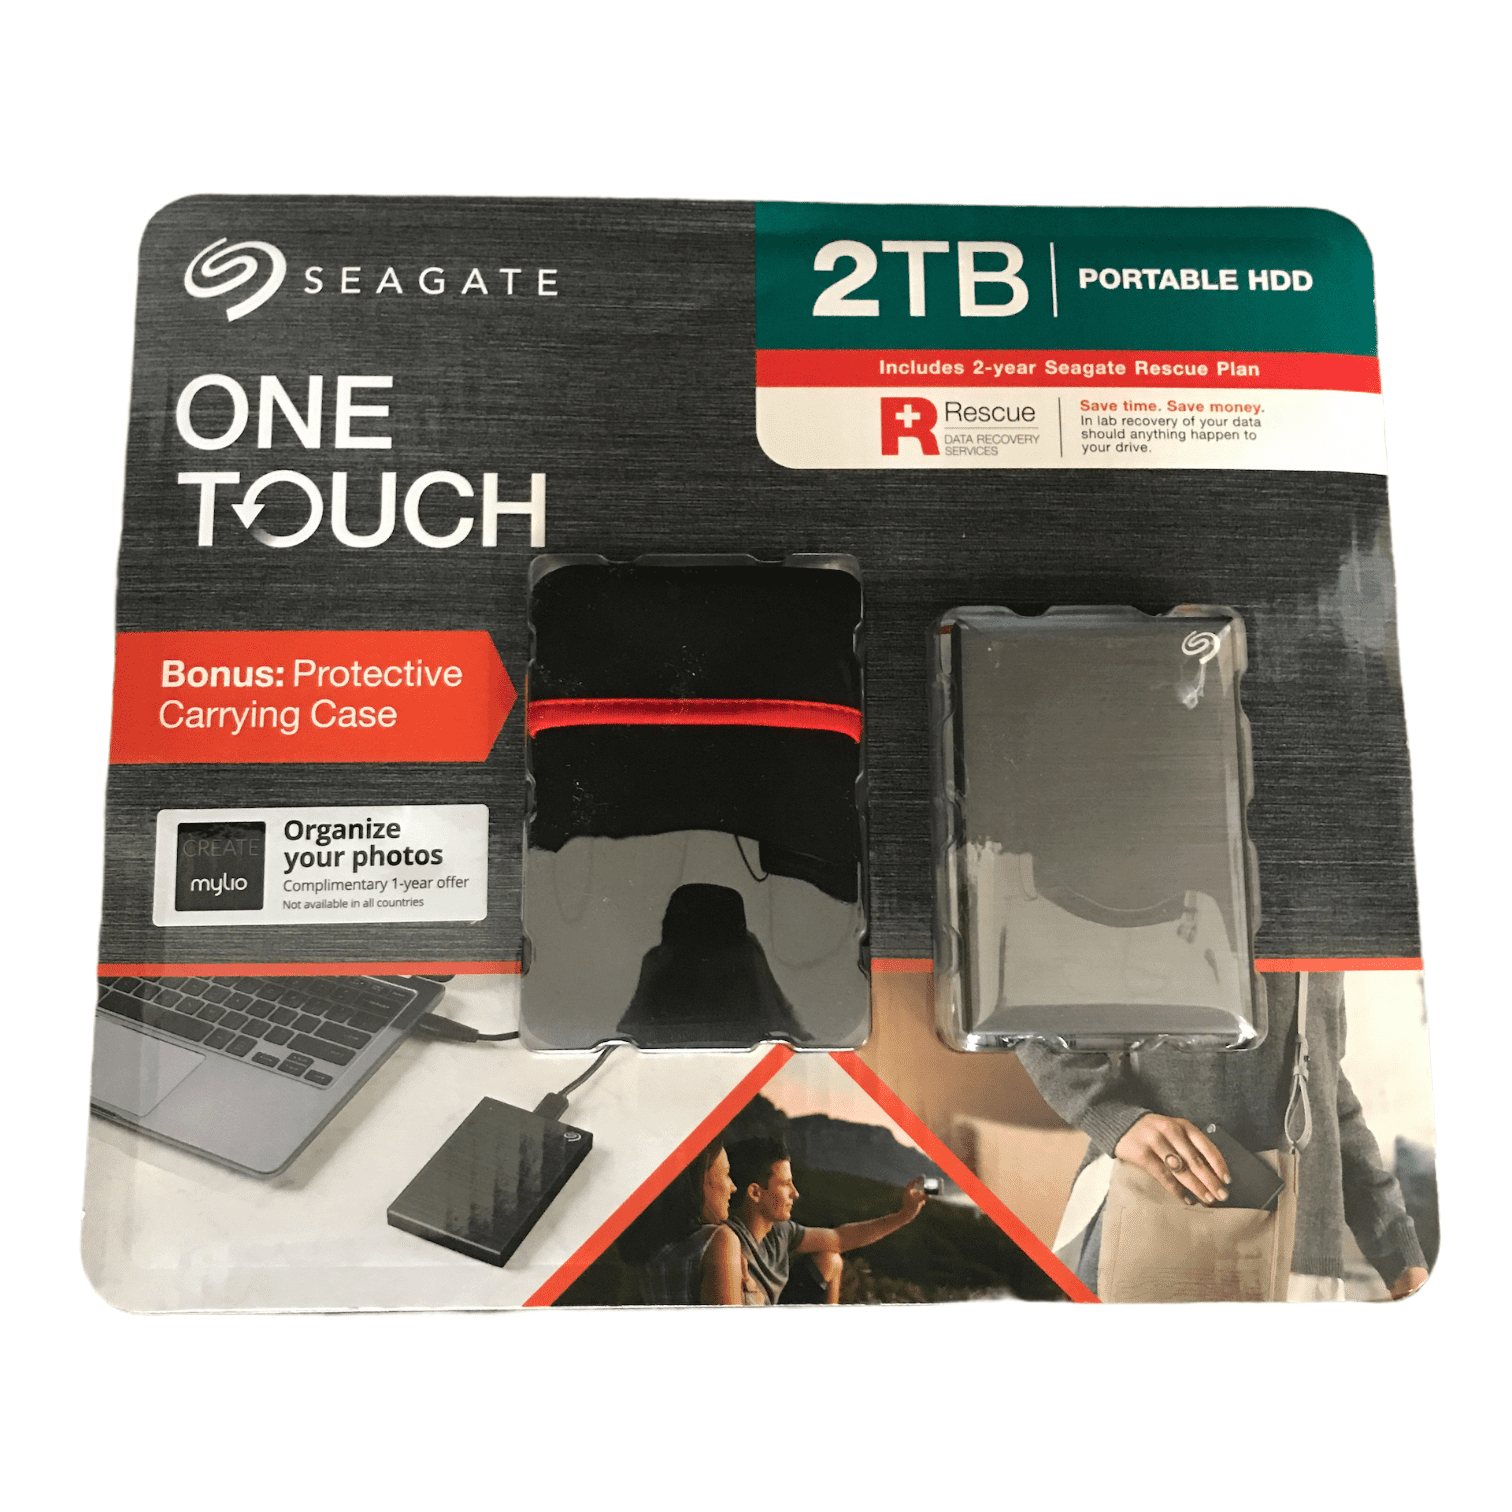 Seagate One Touch 2TB External Hard Drive, Black, 2 Year Rescue, 4mo Adobe